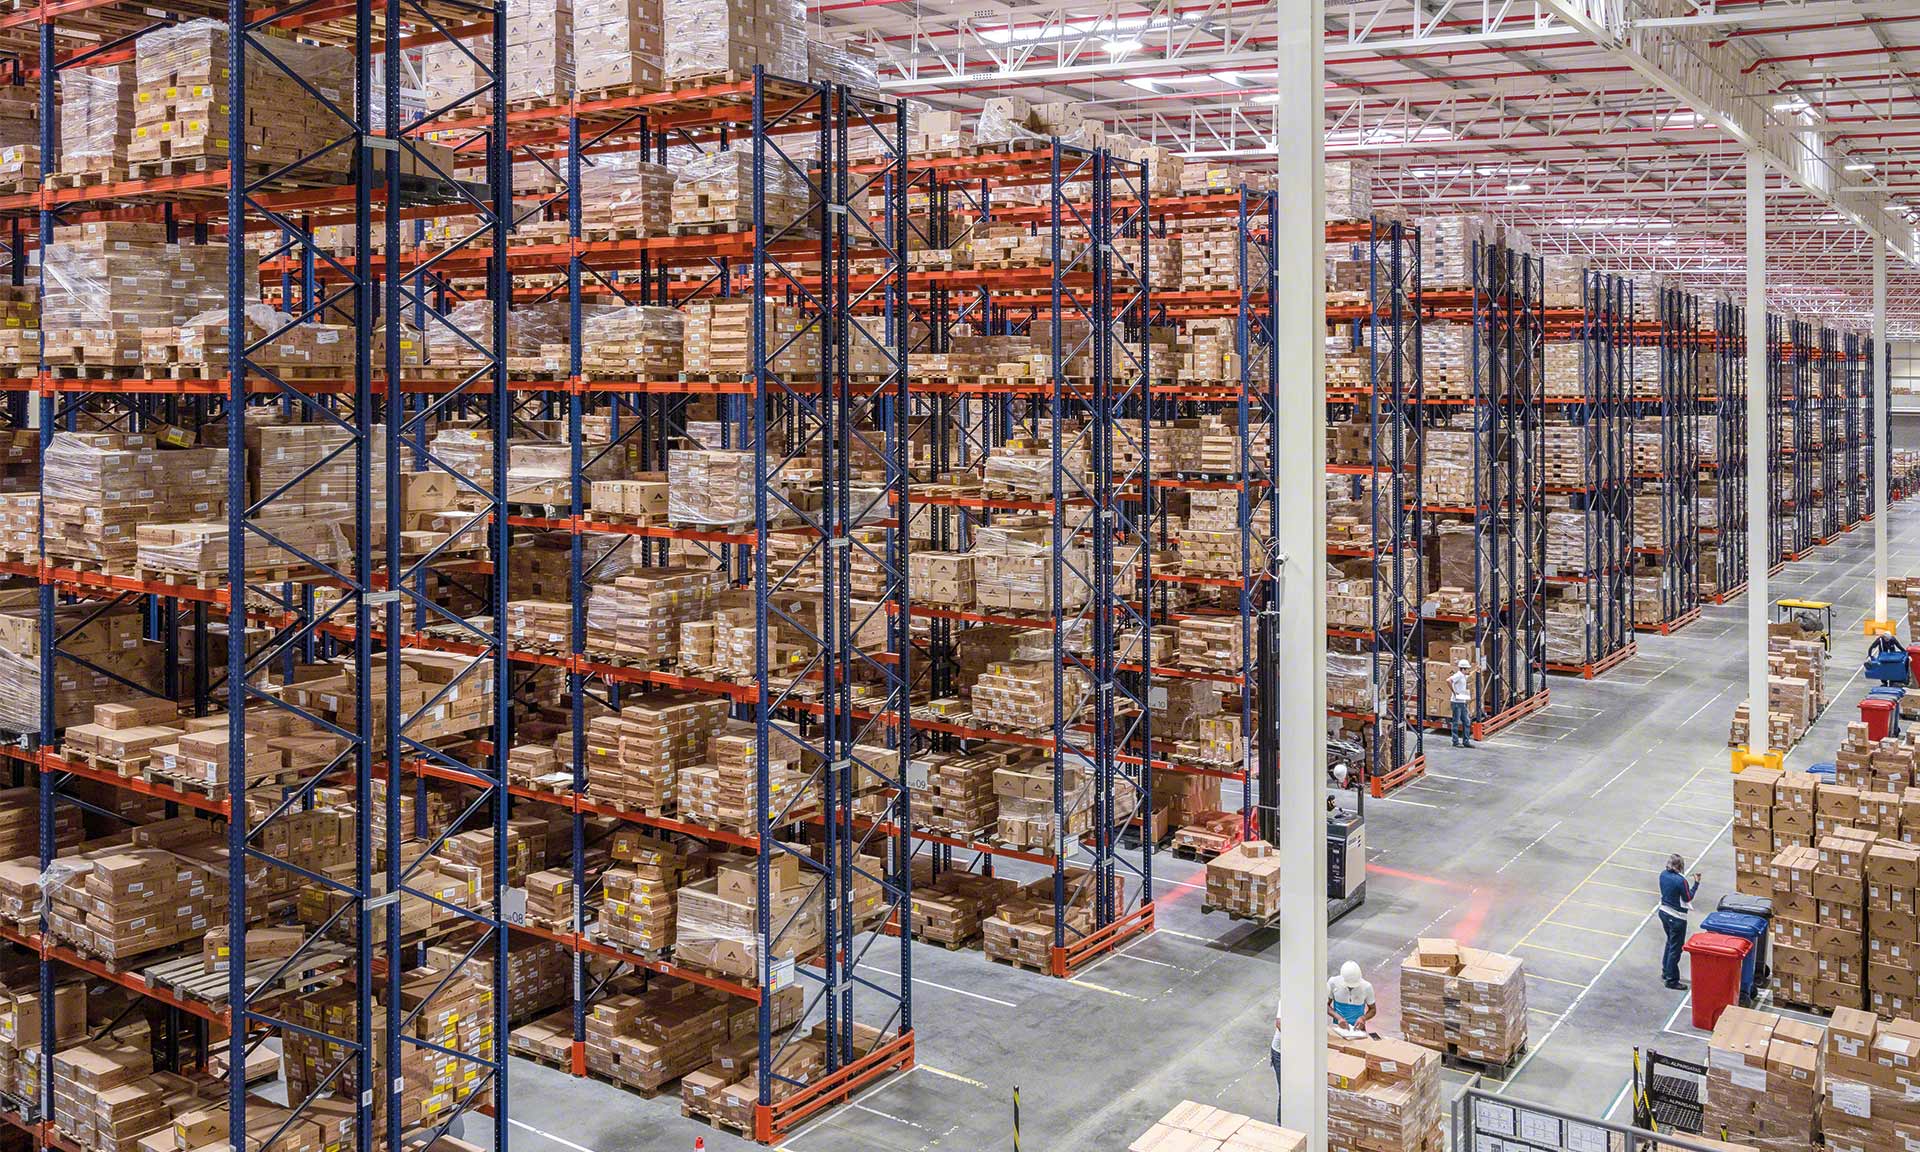 Pallet racks are structures designed to hold pallets